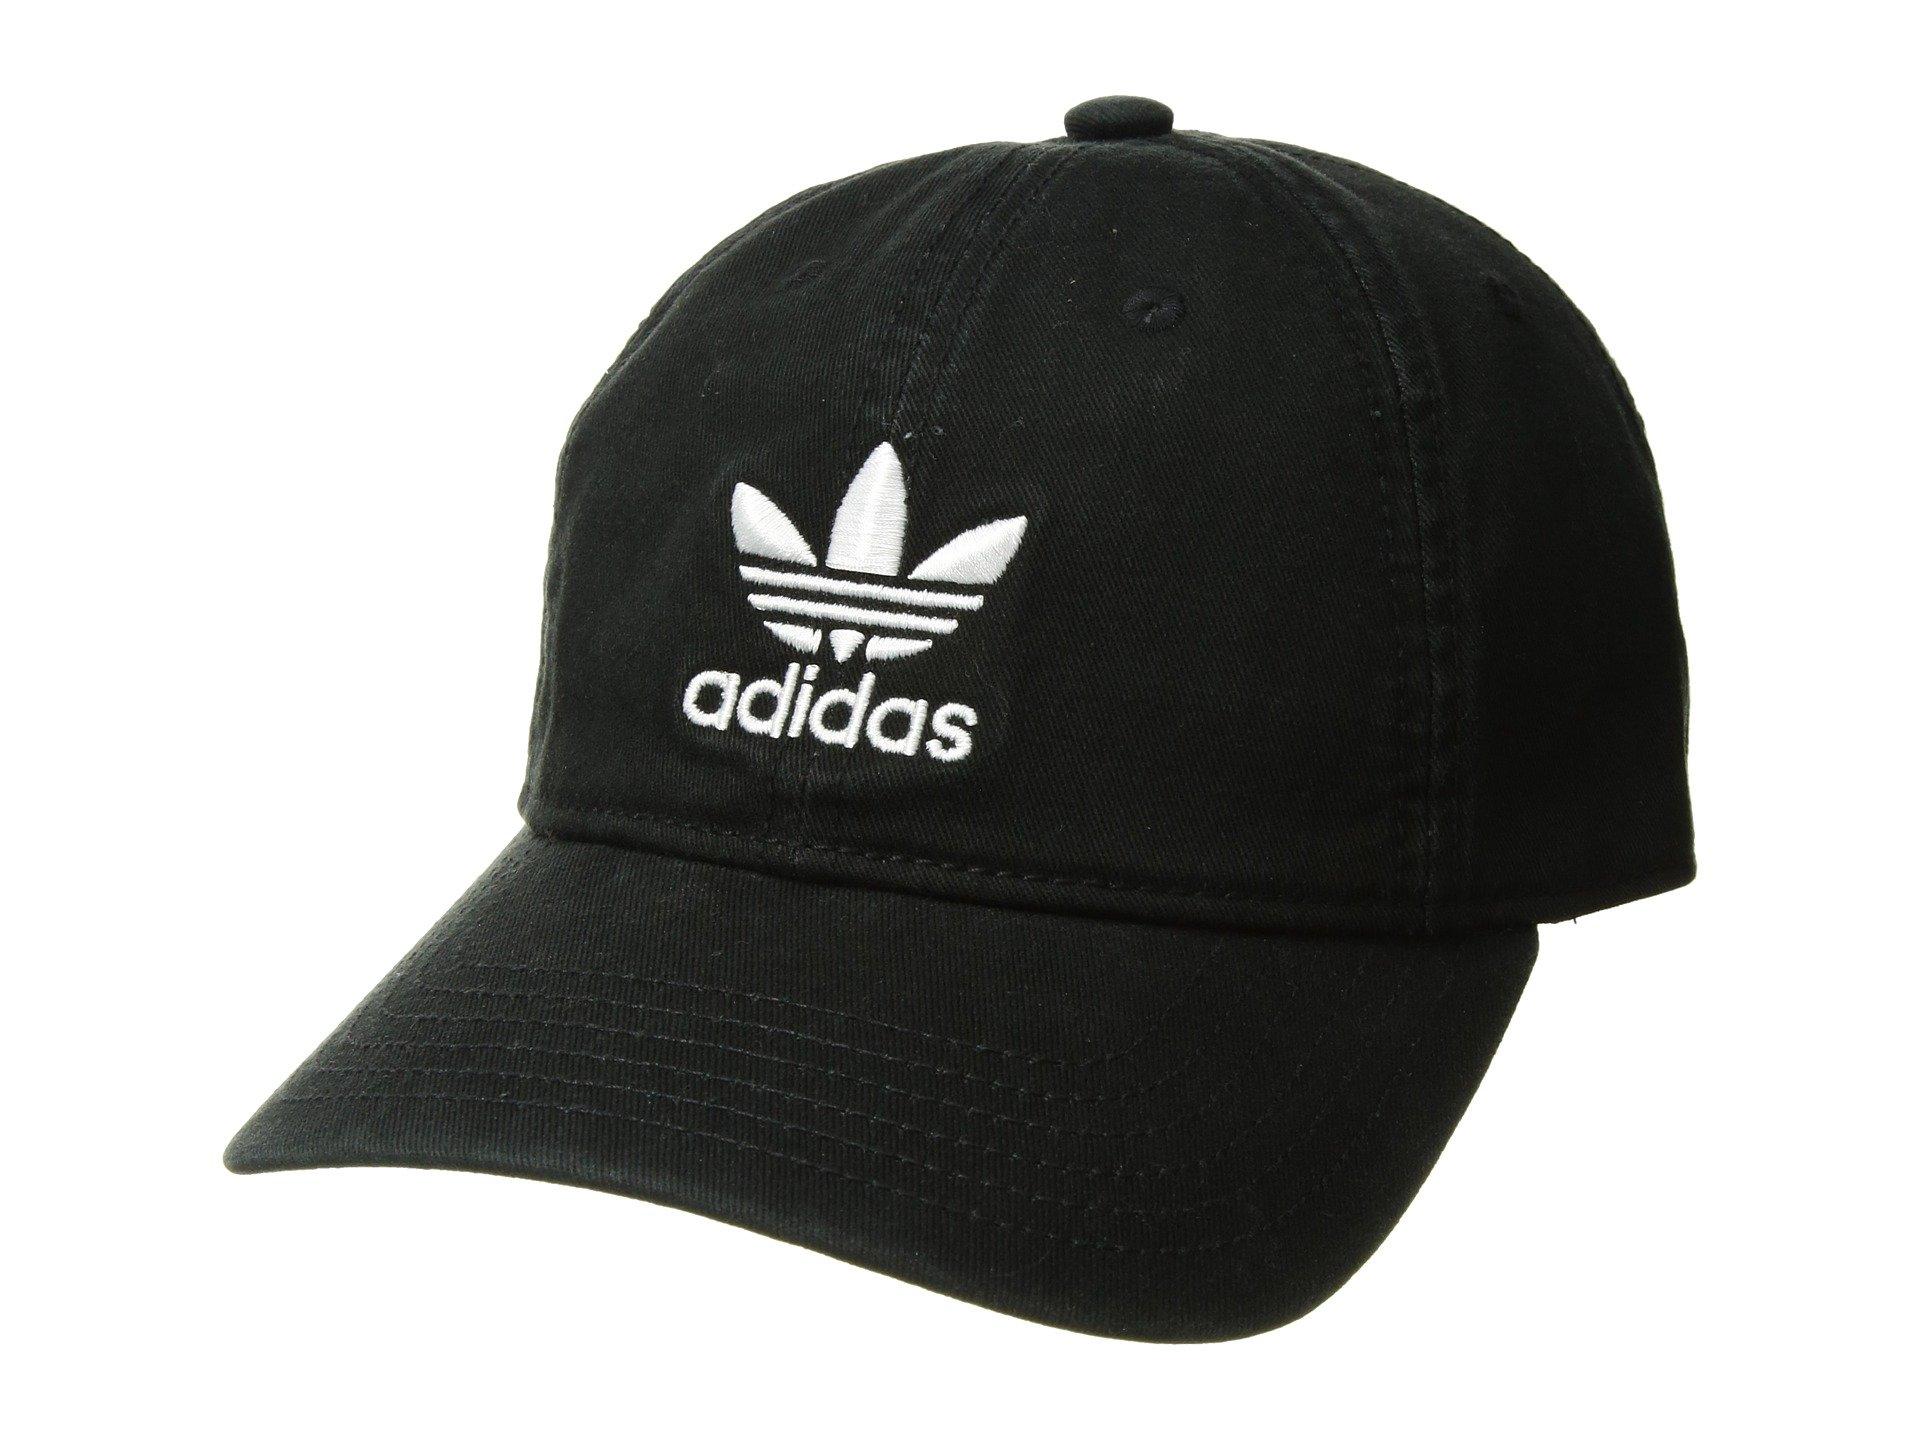 adidas relaxed strap back hat